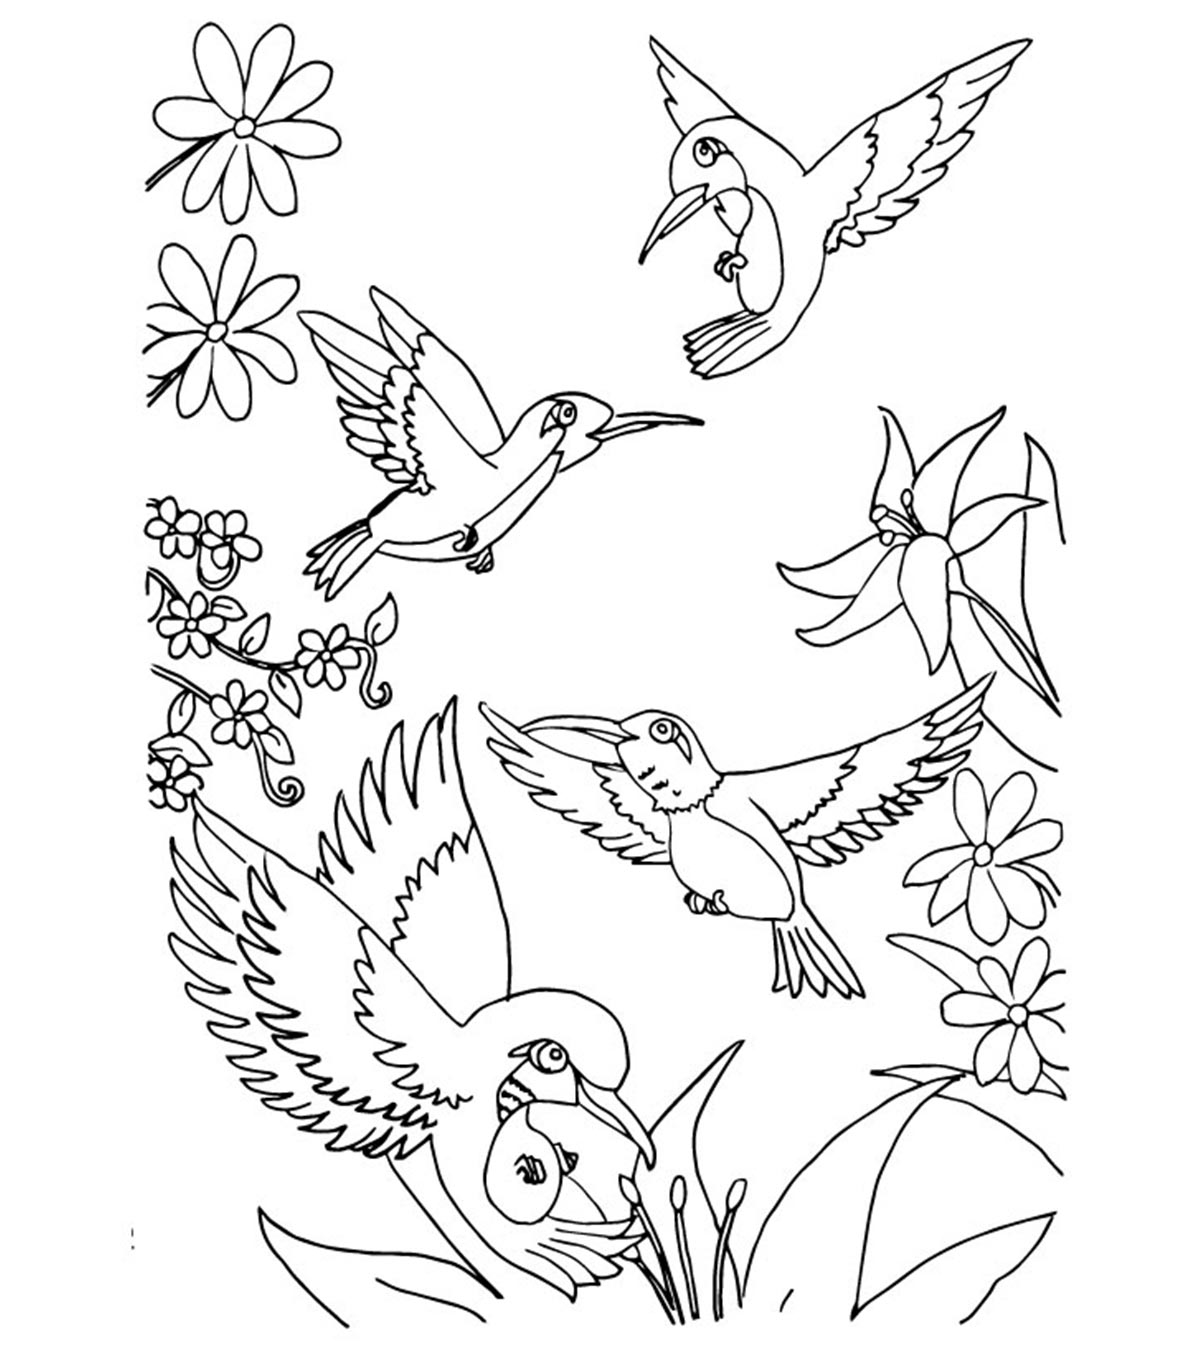 Top 10 Humming Bird Coloring Pages For Your Toddler_image